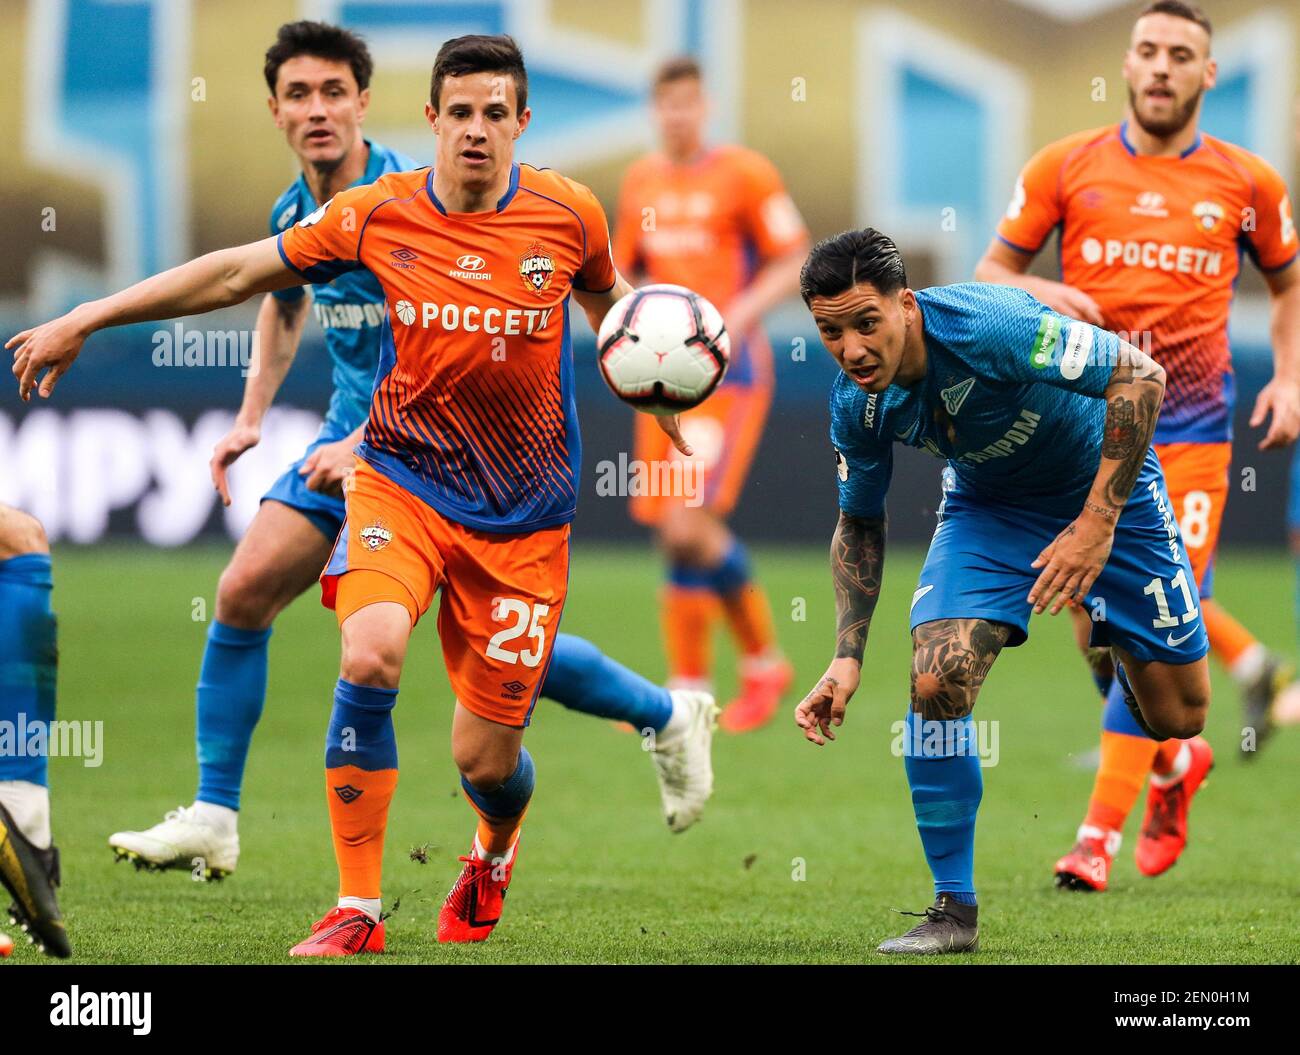 Russian Premier League (RPL). Russian Football Championship 2018/2019. 28  round. The match between Zenit (St. Petersburg) and CSKA (Moscow) at the  Gazprom-arena stadium. Kristijan Bistrovic of CSKA (second left) and  Sebastian Driussi